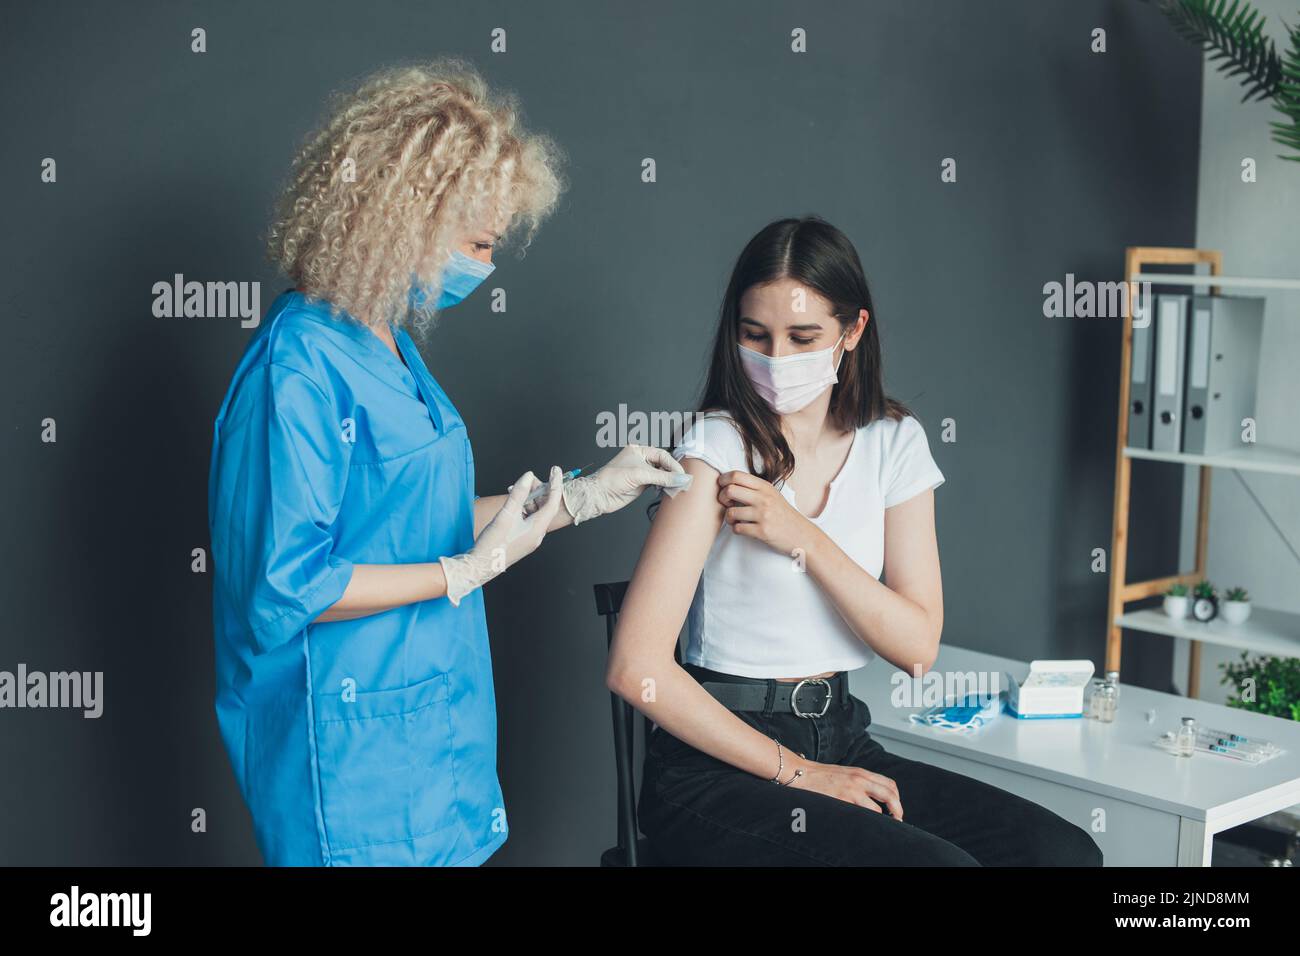 Patient getting vaccinated with covid vaccine intramuscular injection during doctor's appointment in hospital. Vaccine, human clinical trial and Stock Photo